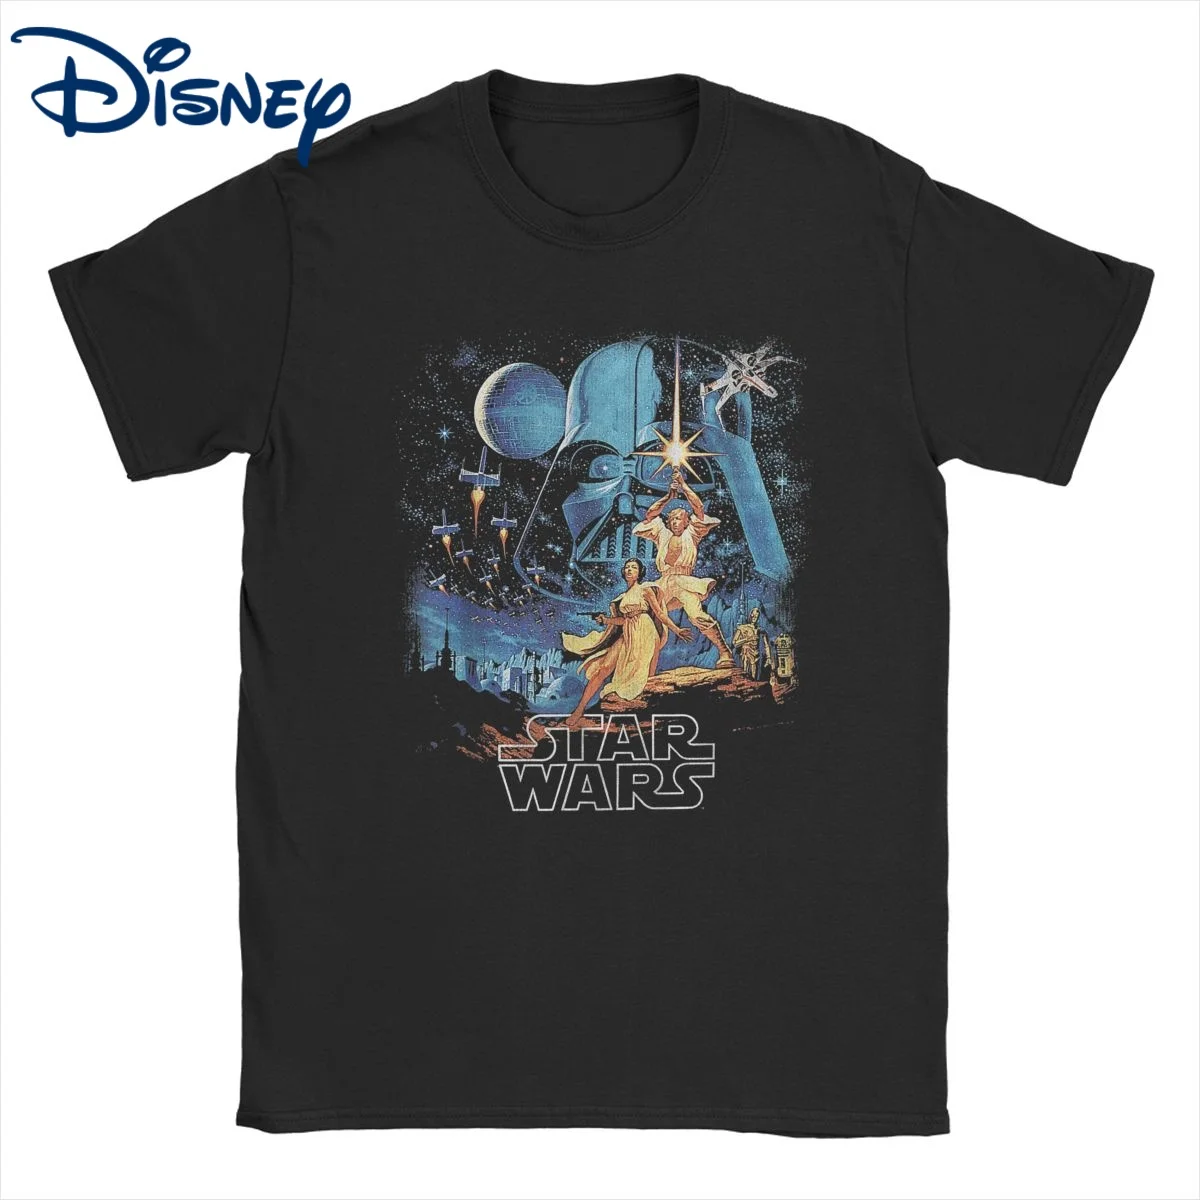 

Disney Star Wars T-Shirts Men Women A New Hope Faded 100% Cotton Tee Shirt Crew Neck T Shirt Graphic Printed Clothes